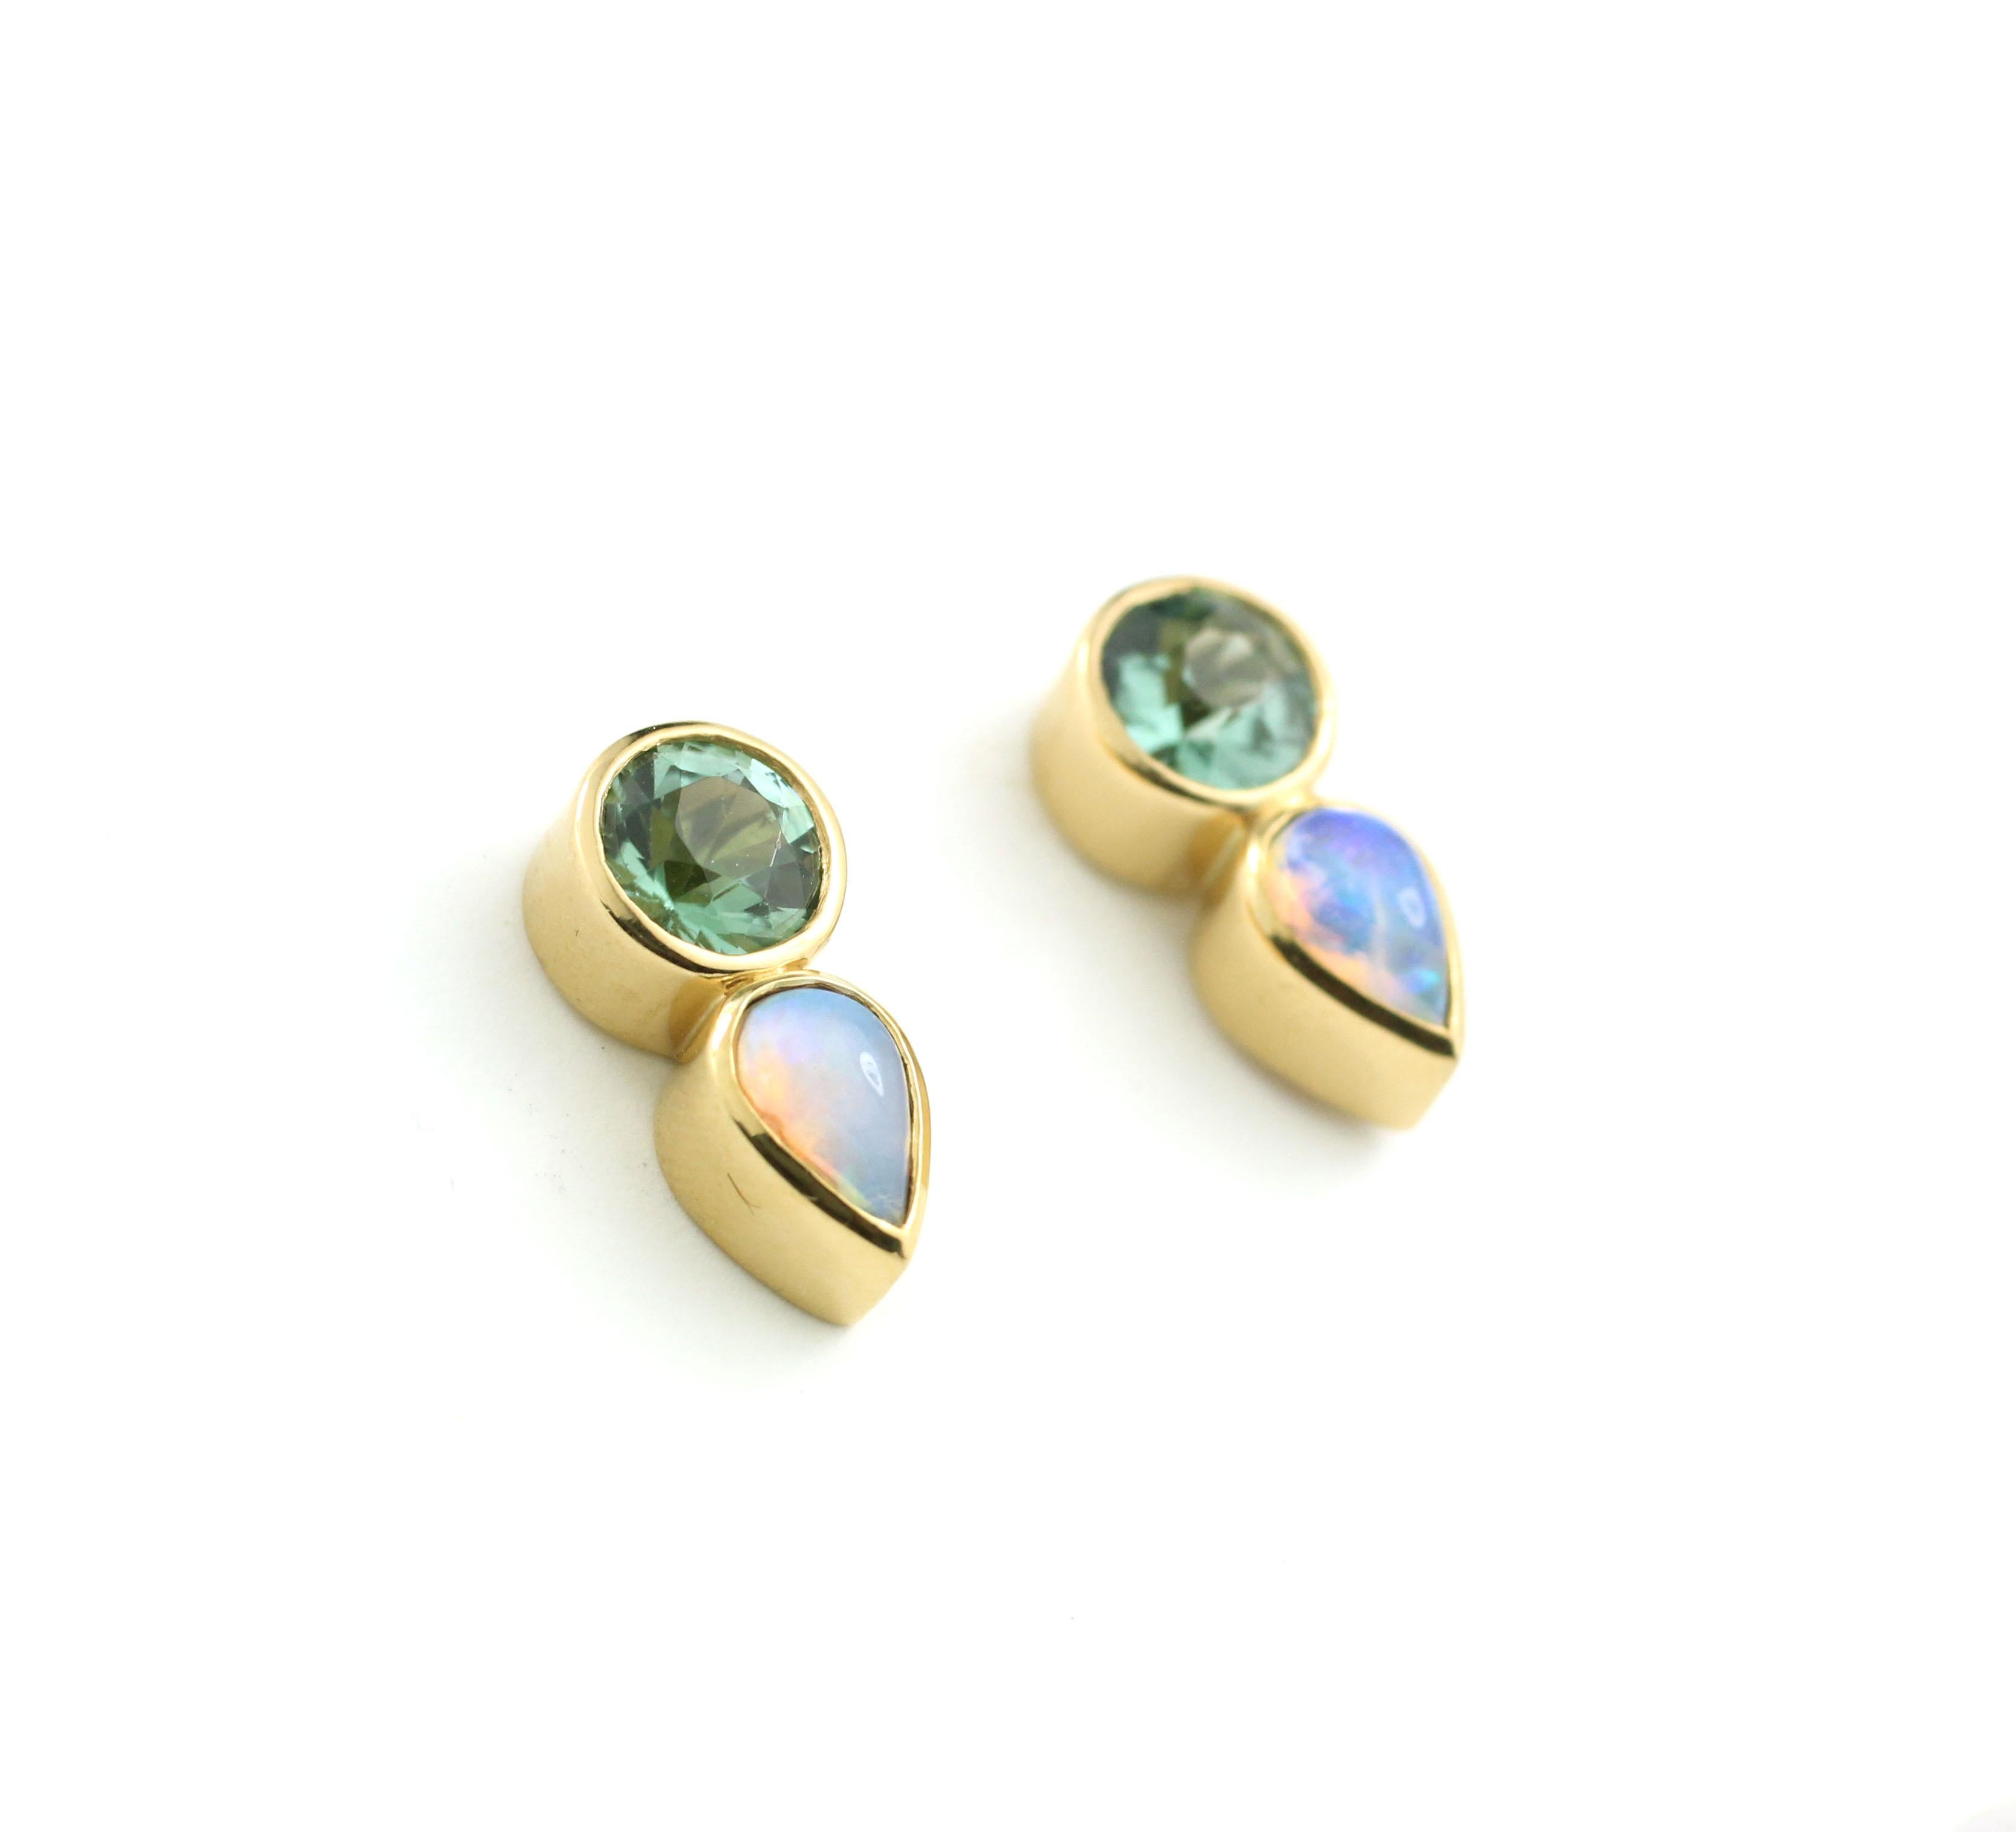 These stud earrings are made special by the unique pairing of two round, faceted, mint green Tourmalines of exceptional brightness (1.01 Cts.) with two fiery, pear shape Opals (.46 Cts.).  Bezel set in 22Kt Gold with 18 Kt Gold posts and backs, for